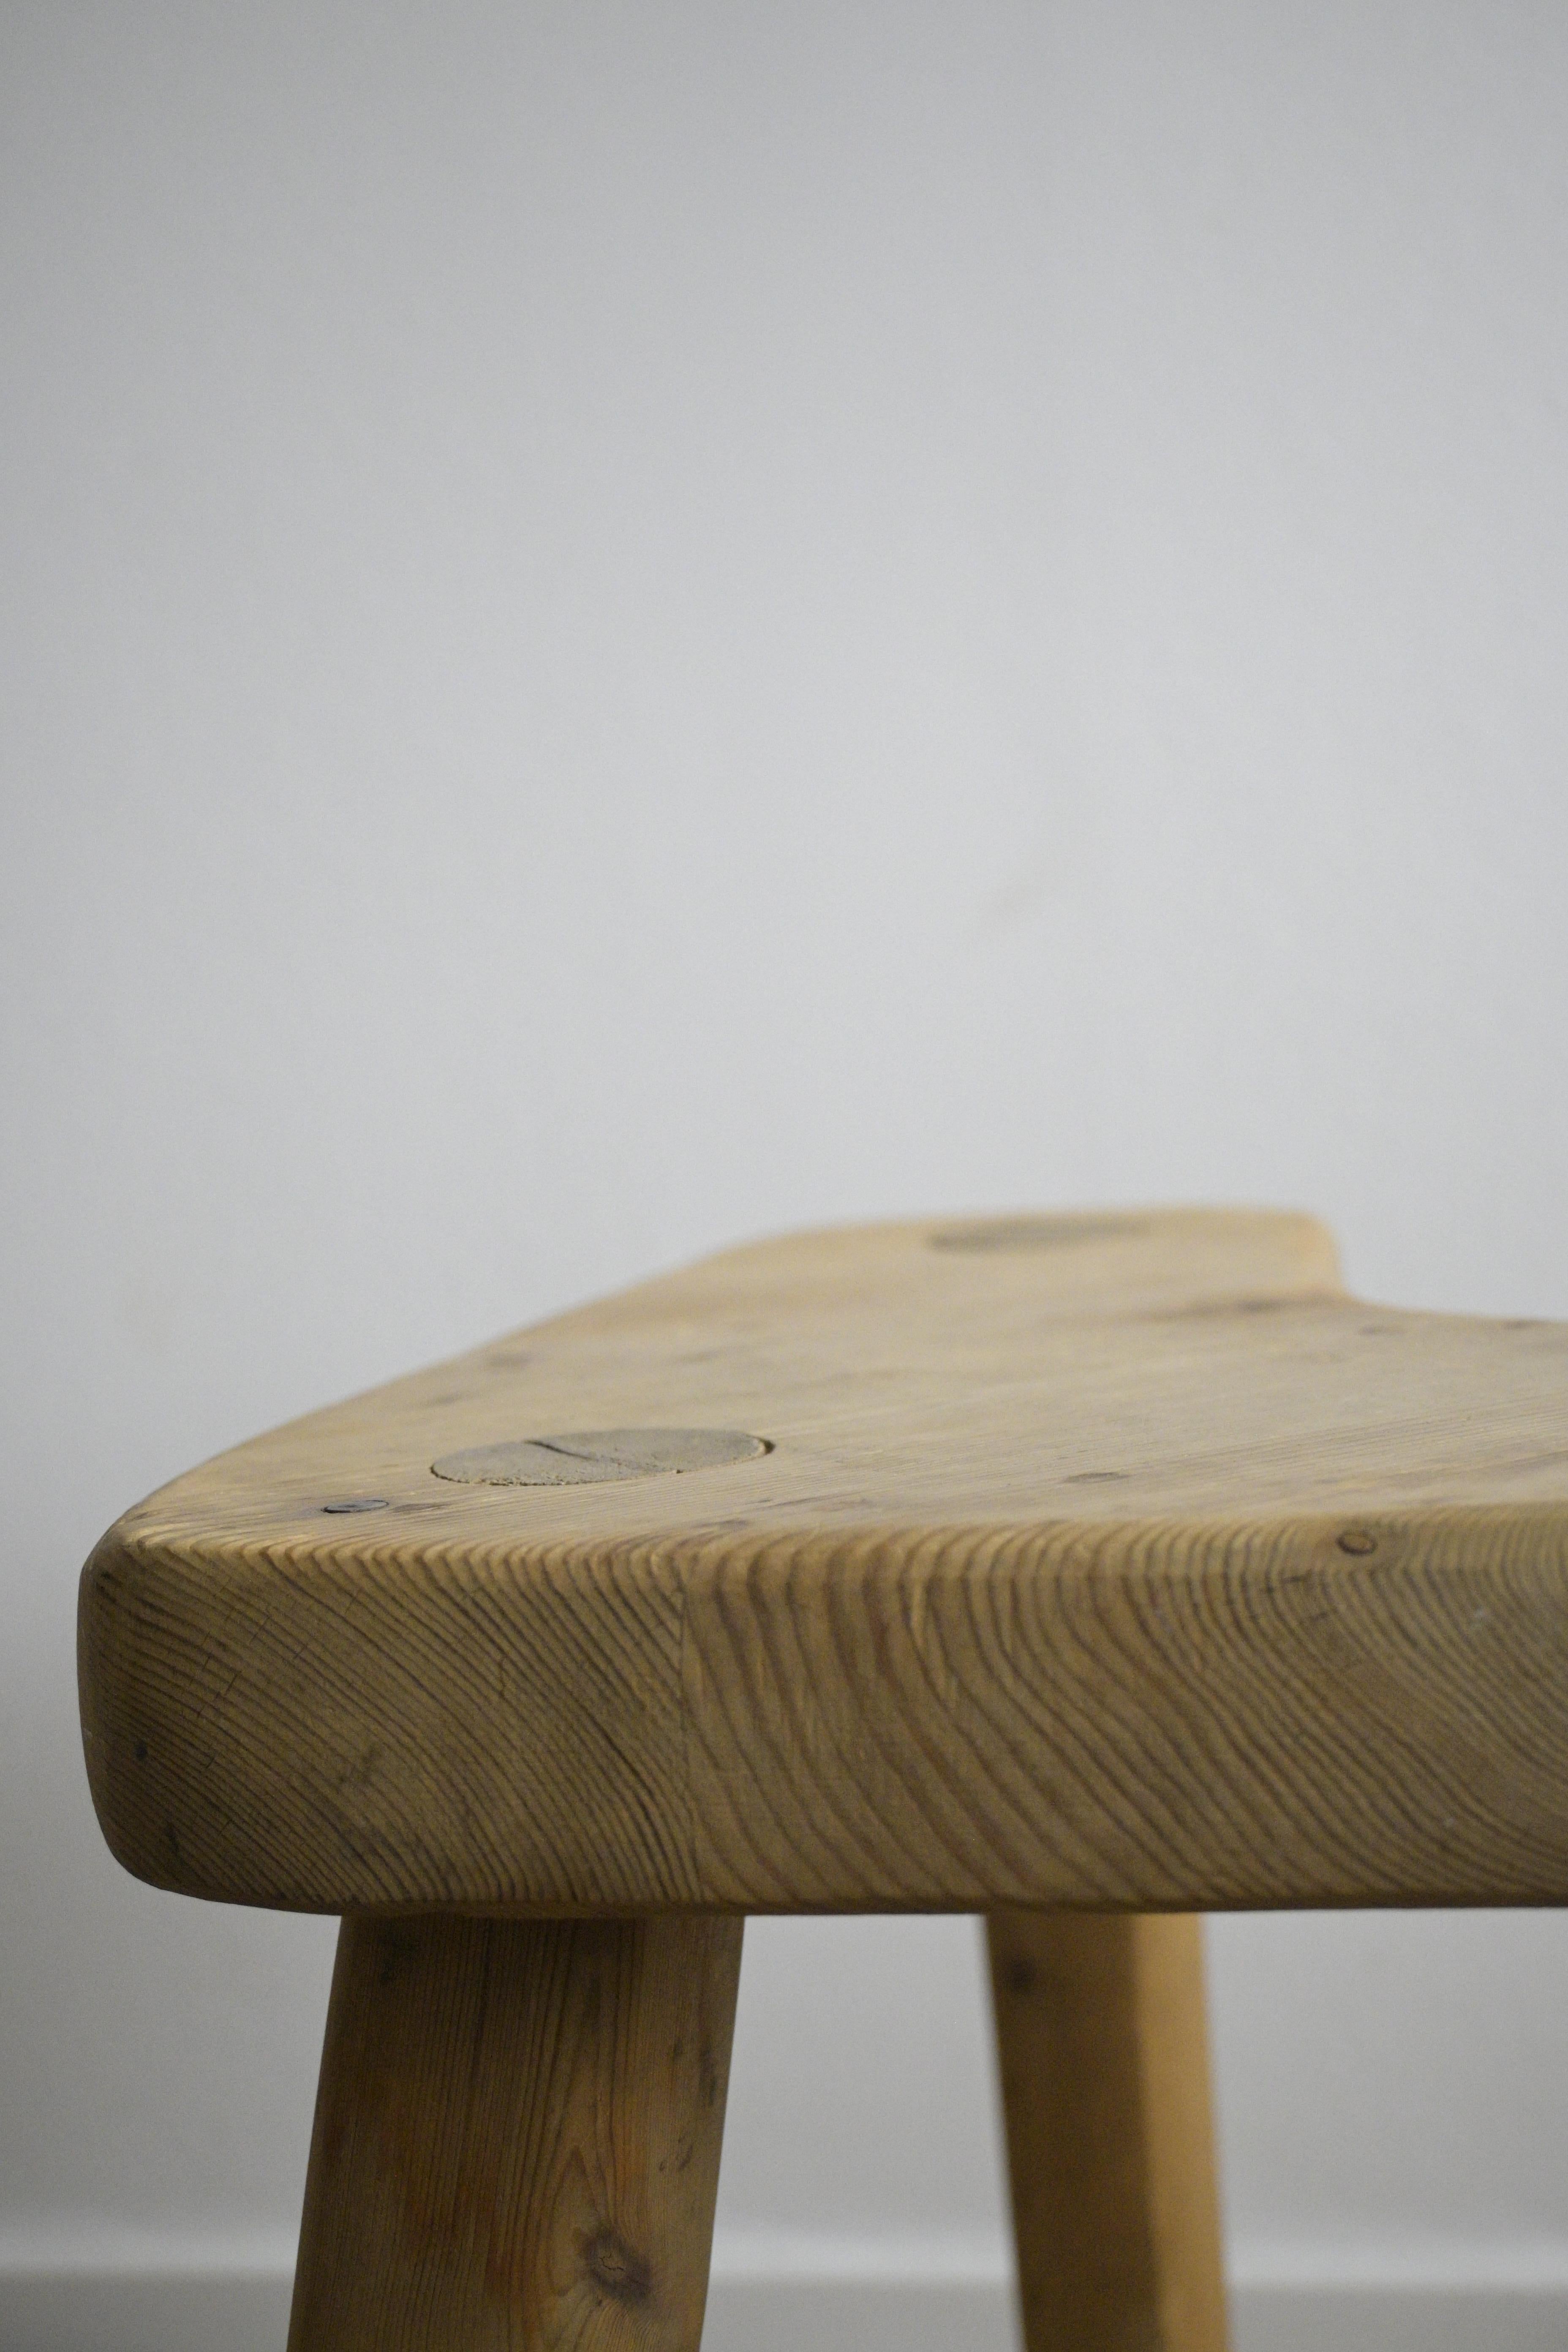 Hand-Crafted Unsymmetric Pine Stool or Side Table by Stig Sandqvist, Vemdalen, Sweden 1950s For Sale